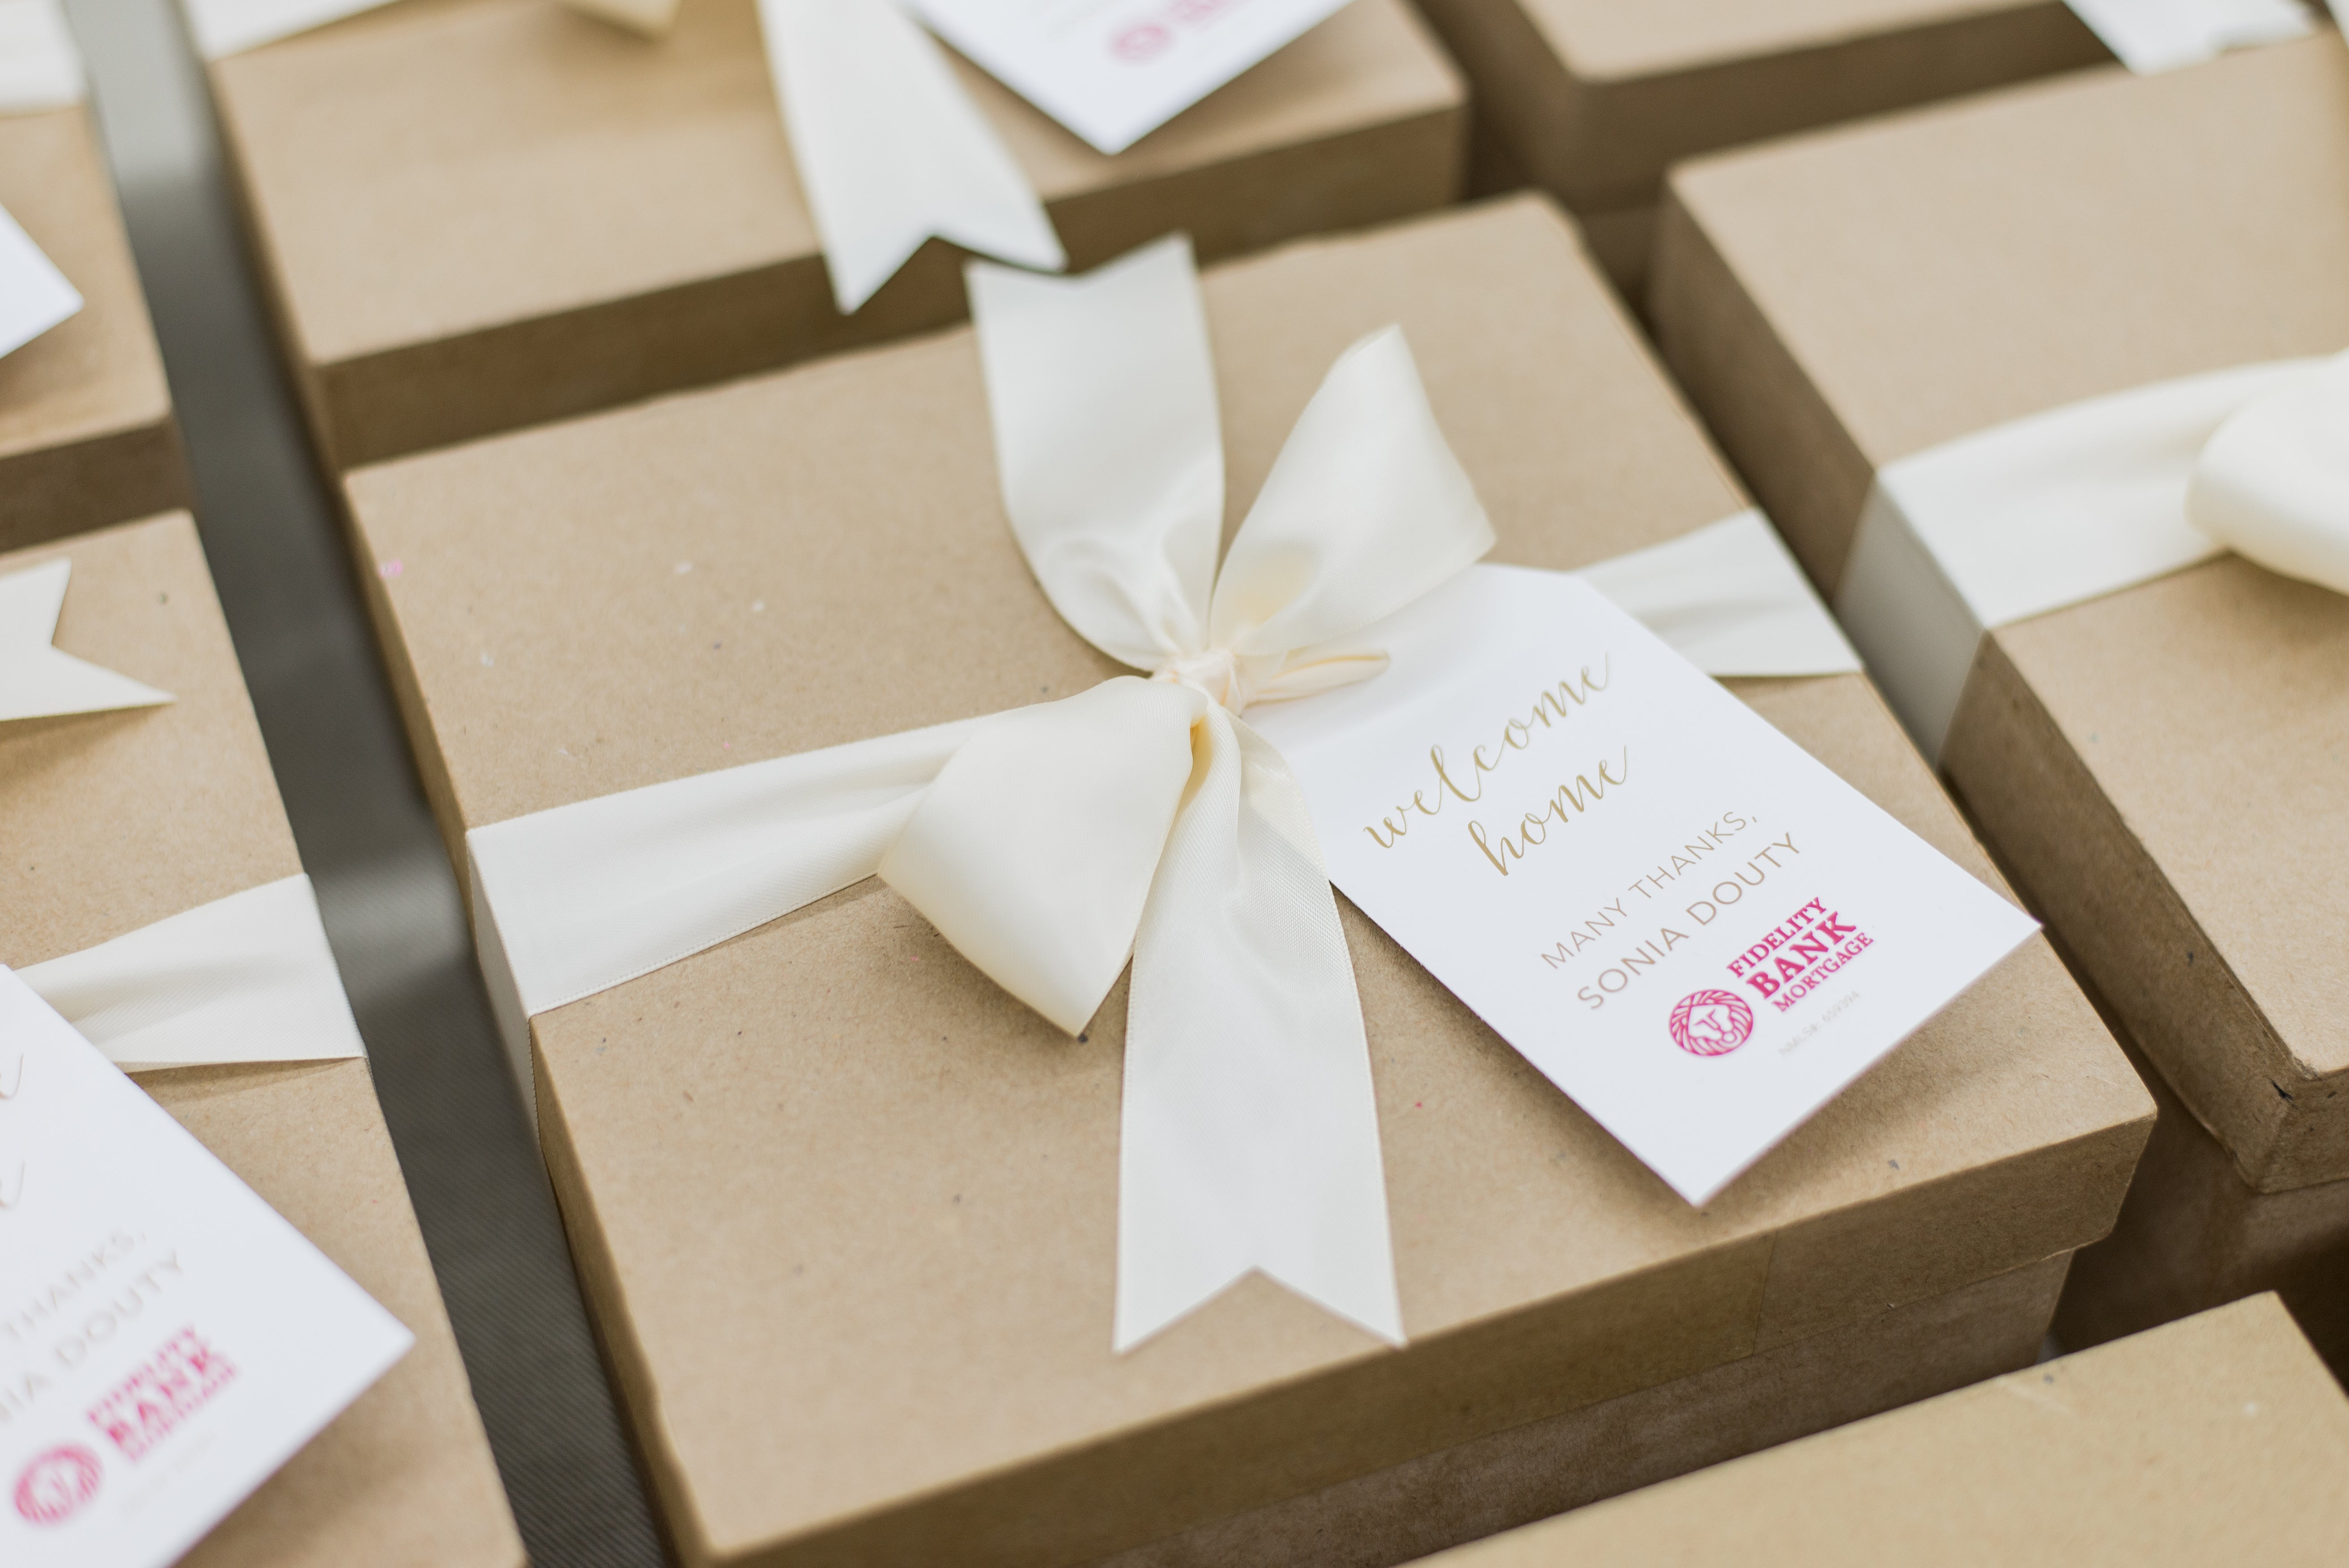 Gallery: Mortgage Banker Custom Client Appreication Gift Boxes